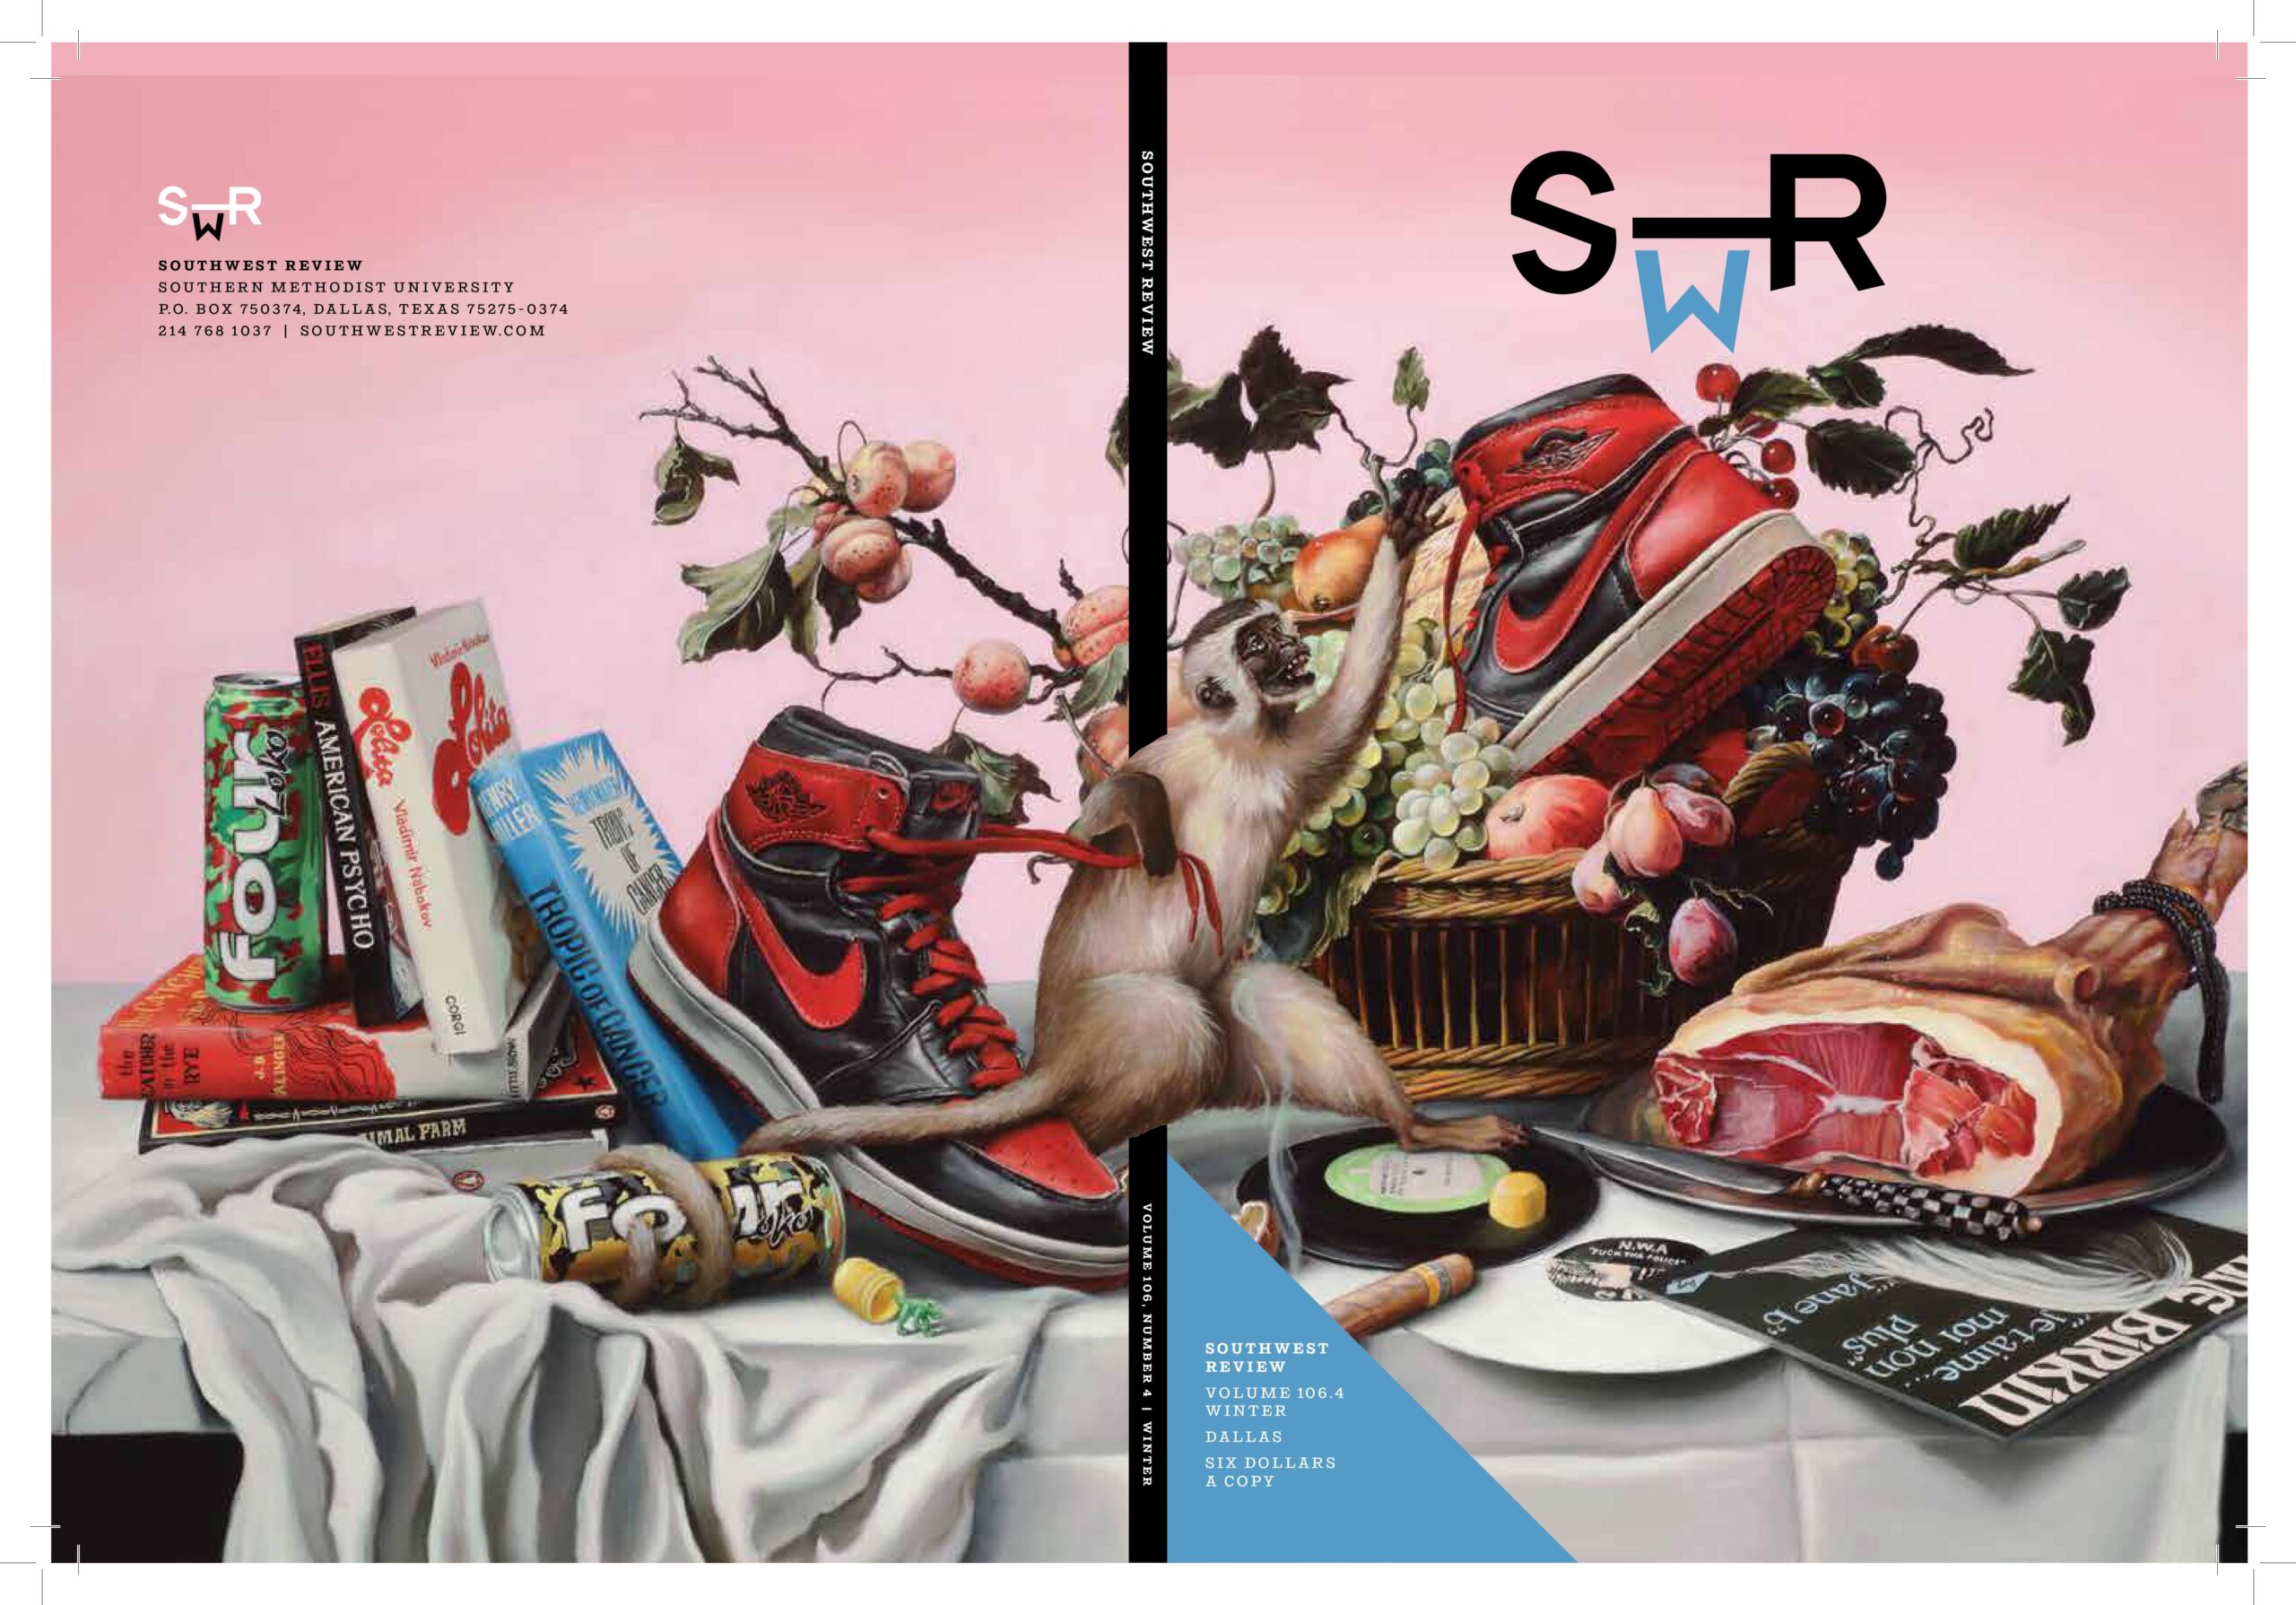 SwR 106.4 Wrap Cover 10.13.21 copy scaled